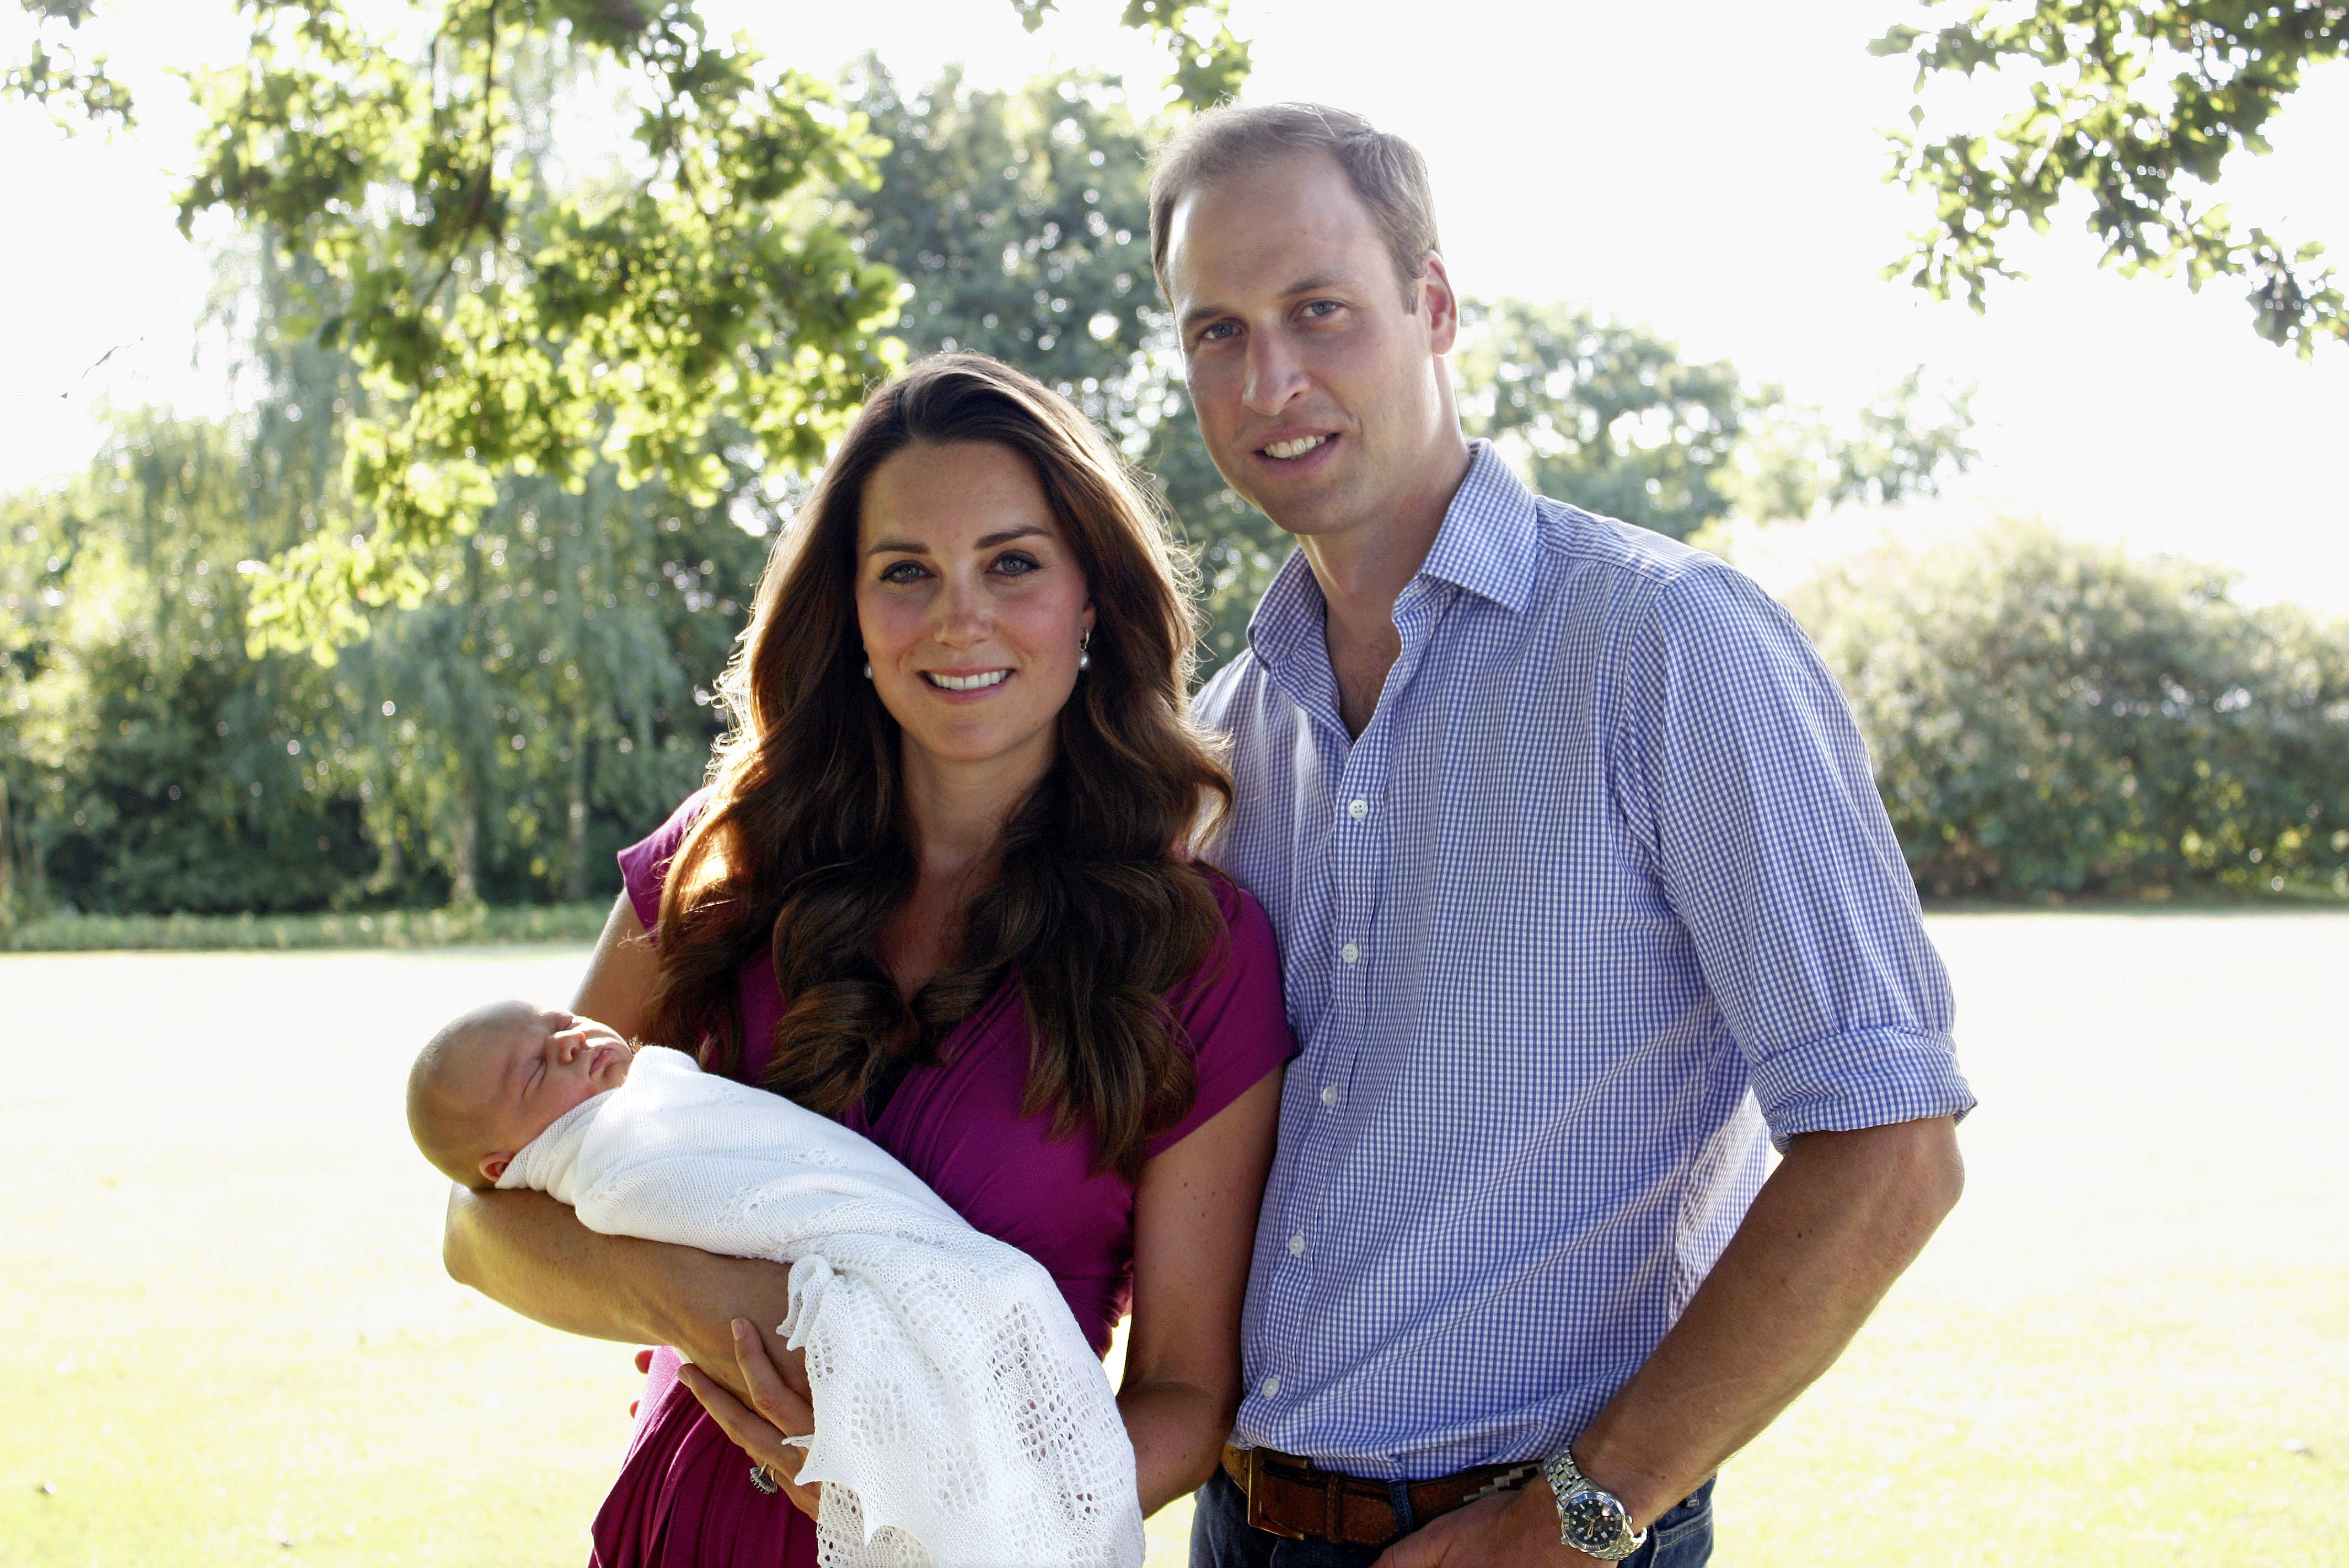 First official photo of Prince George after his birth | Photo: Getty Images